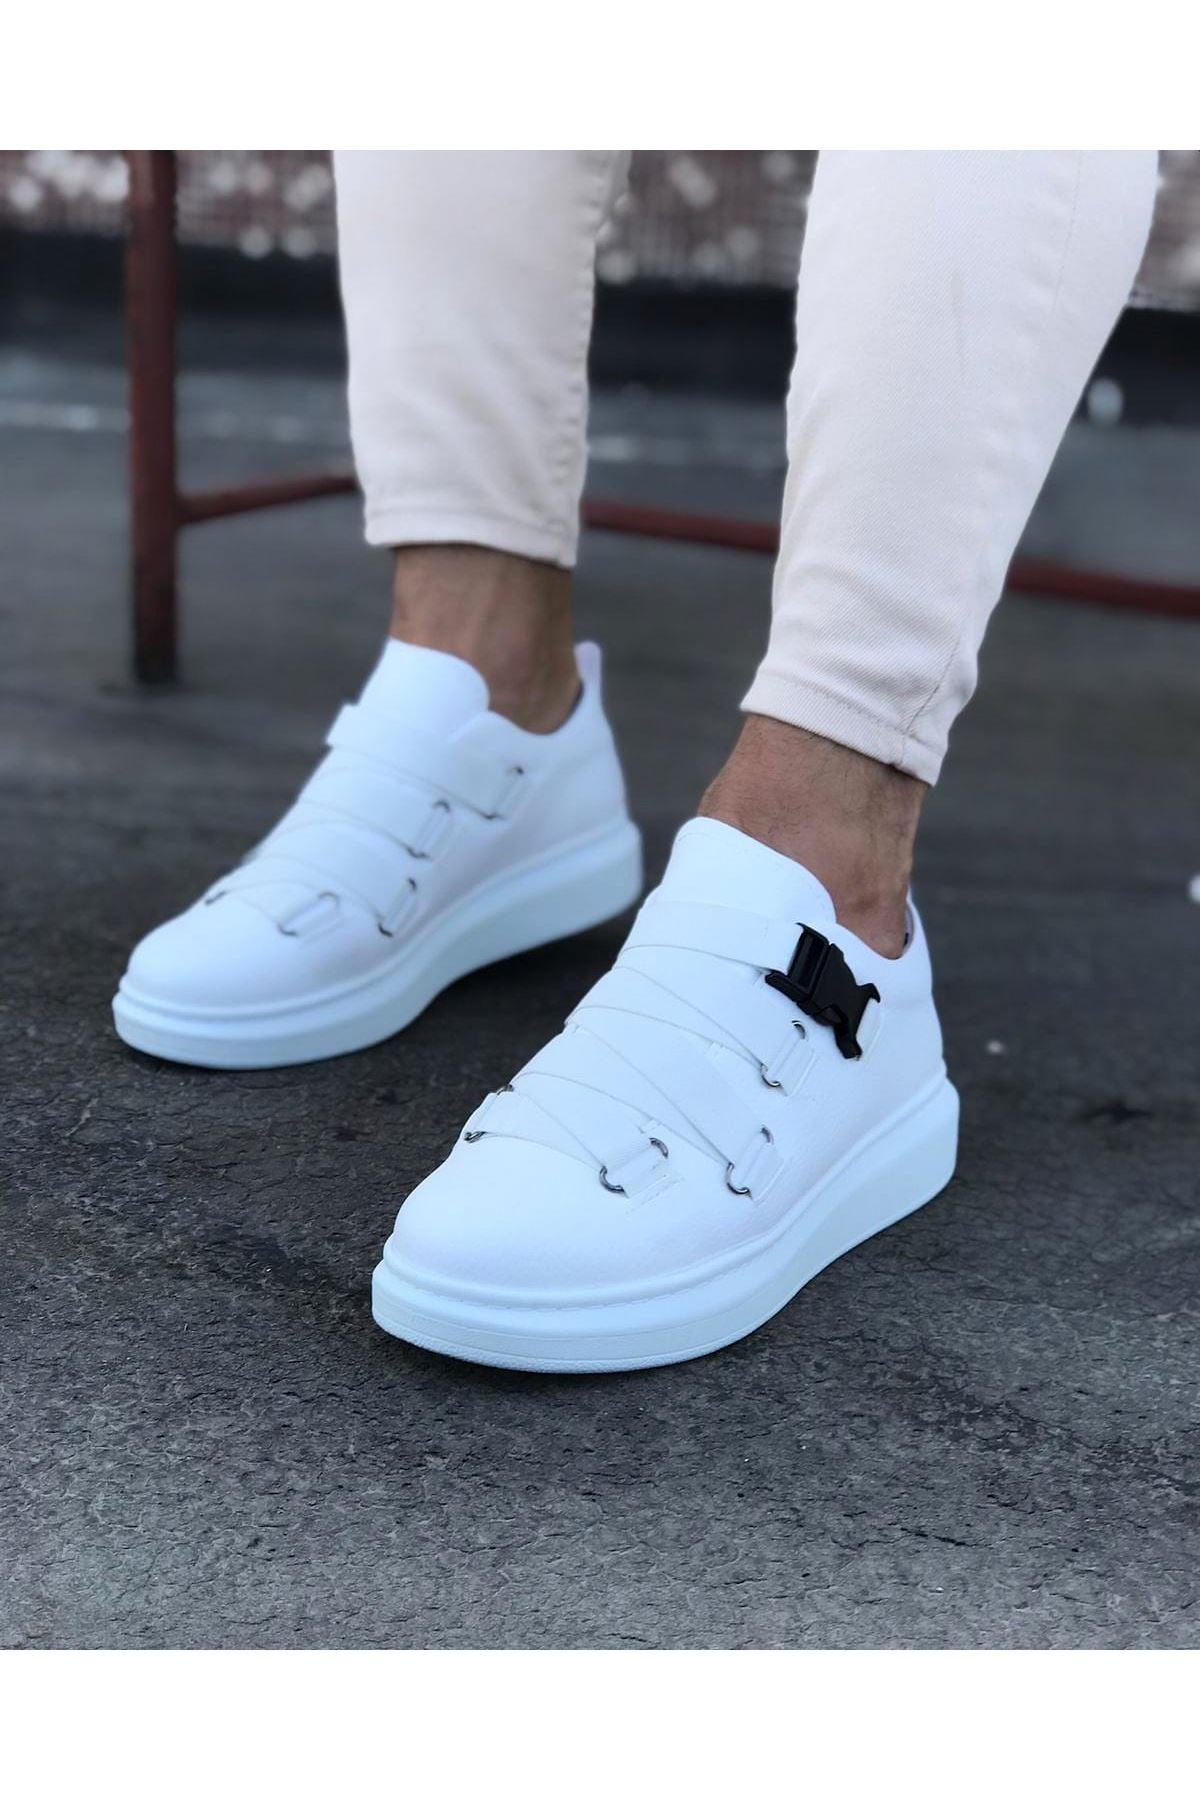 WG033 White Men's High-Sole Shoes Sneakers - STREETMODE ™